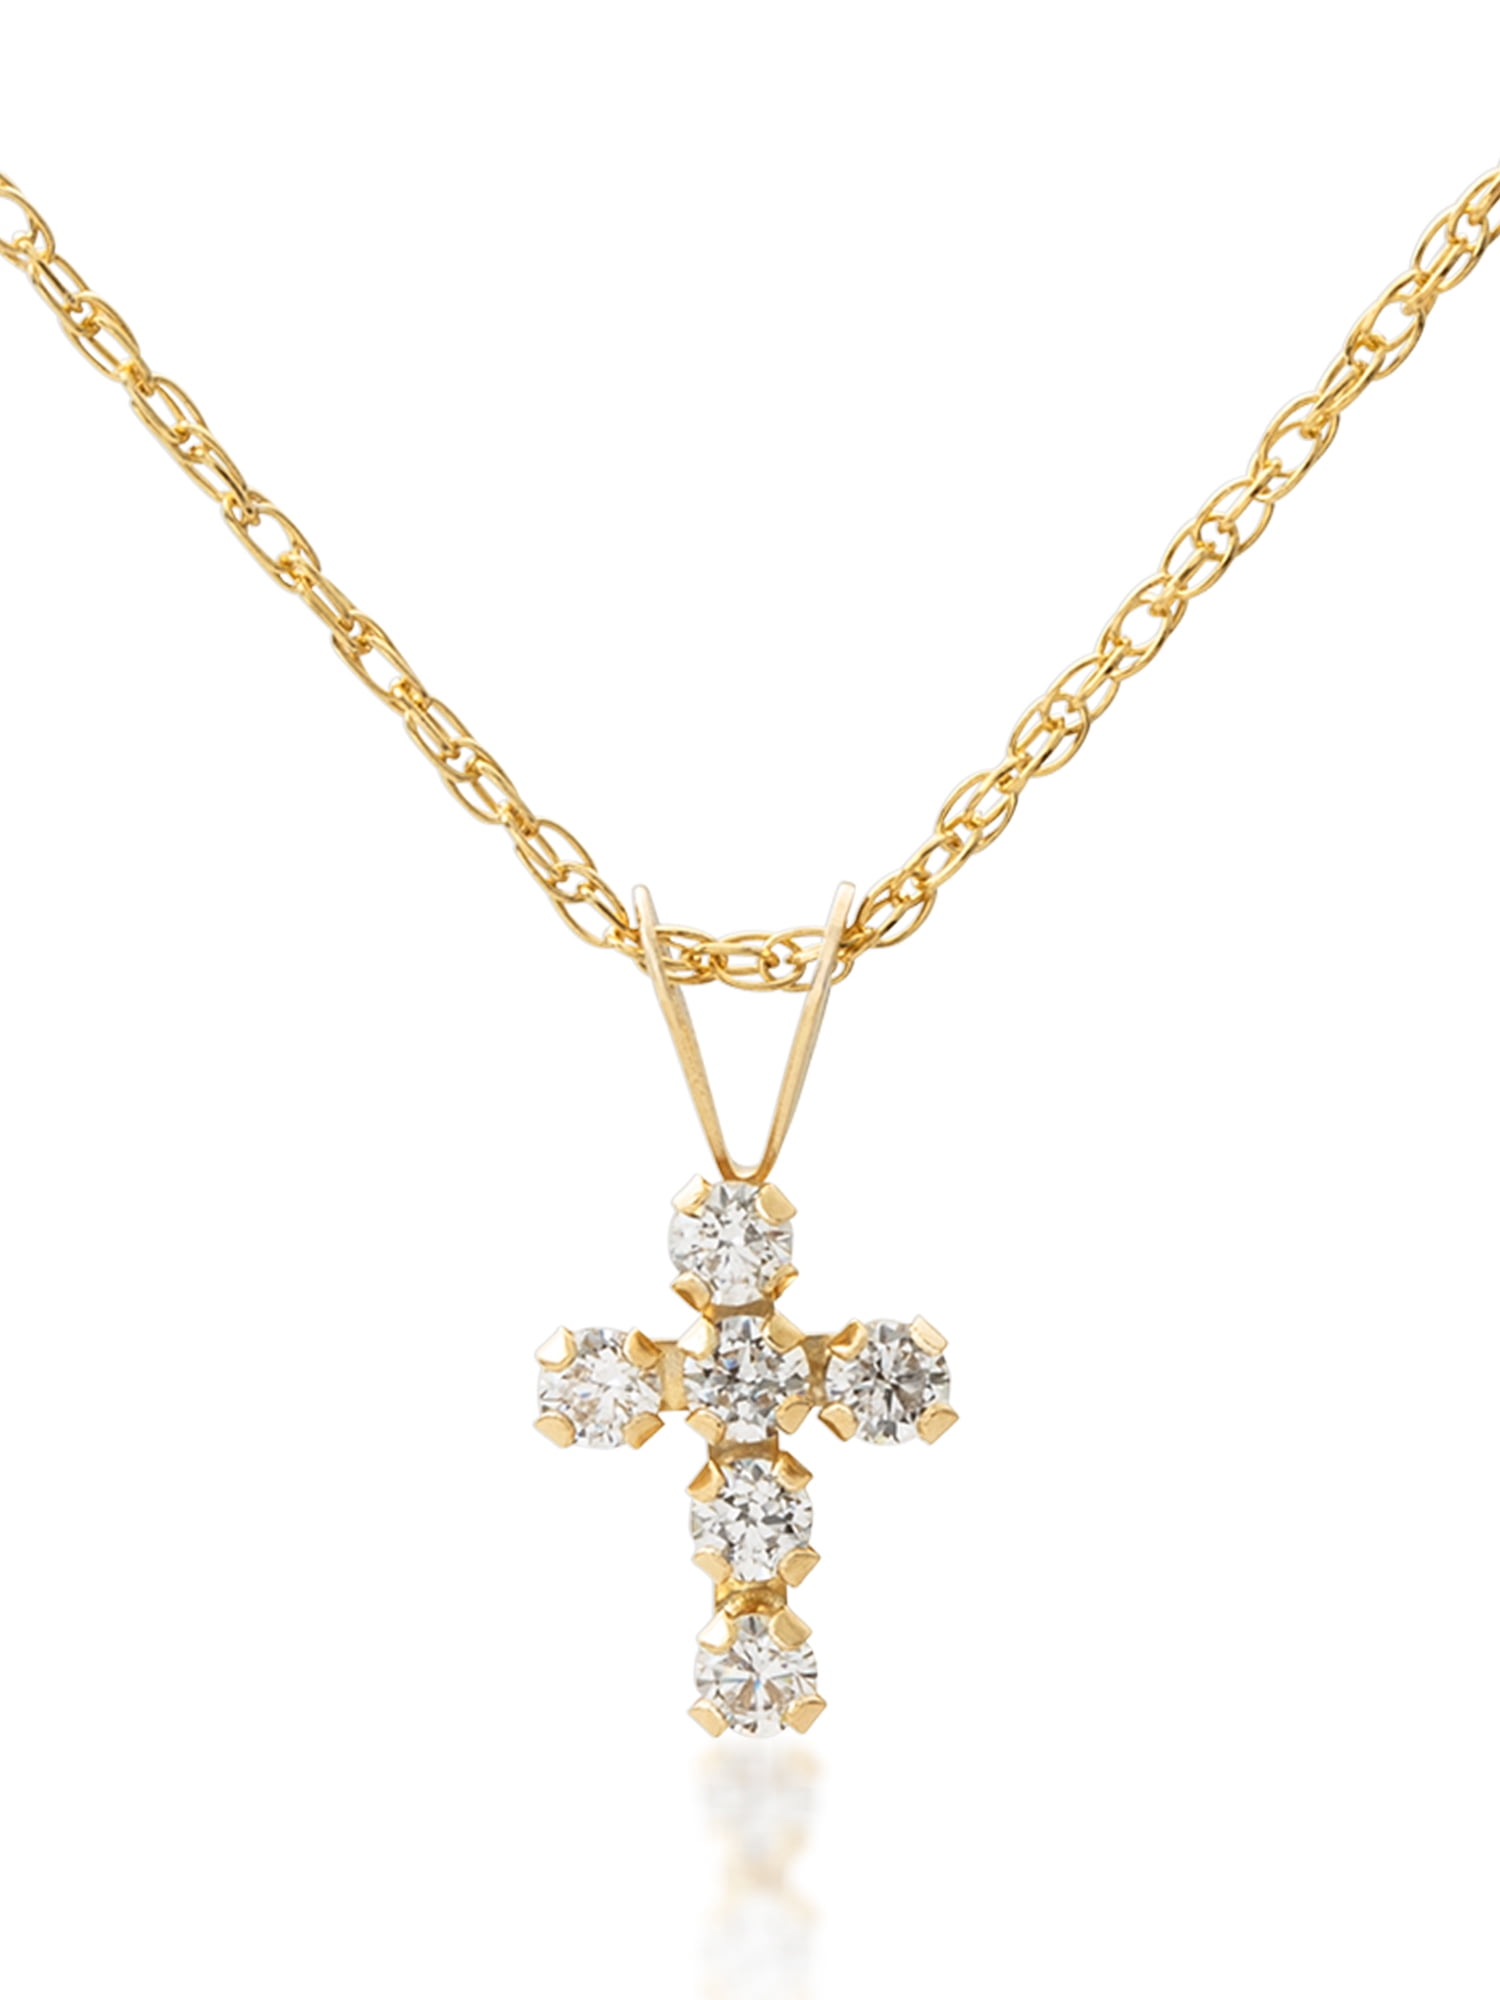 14K Yellow Gold Over Sterling Silver Cz Tiny Cross Pendant Charm Necklace 